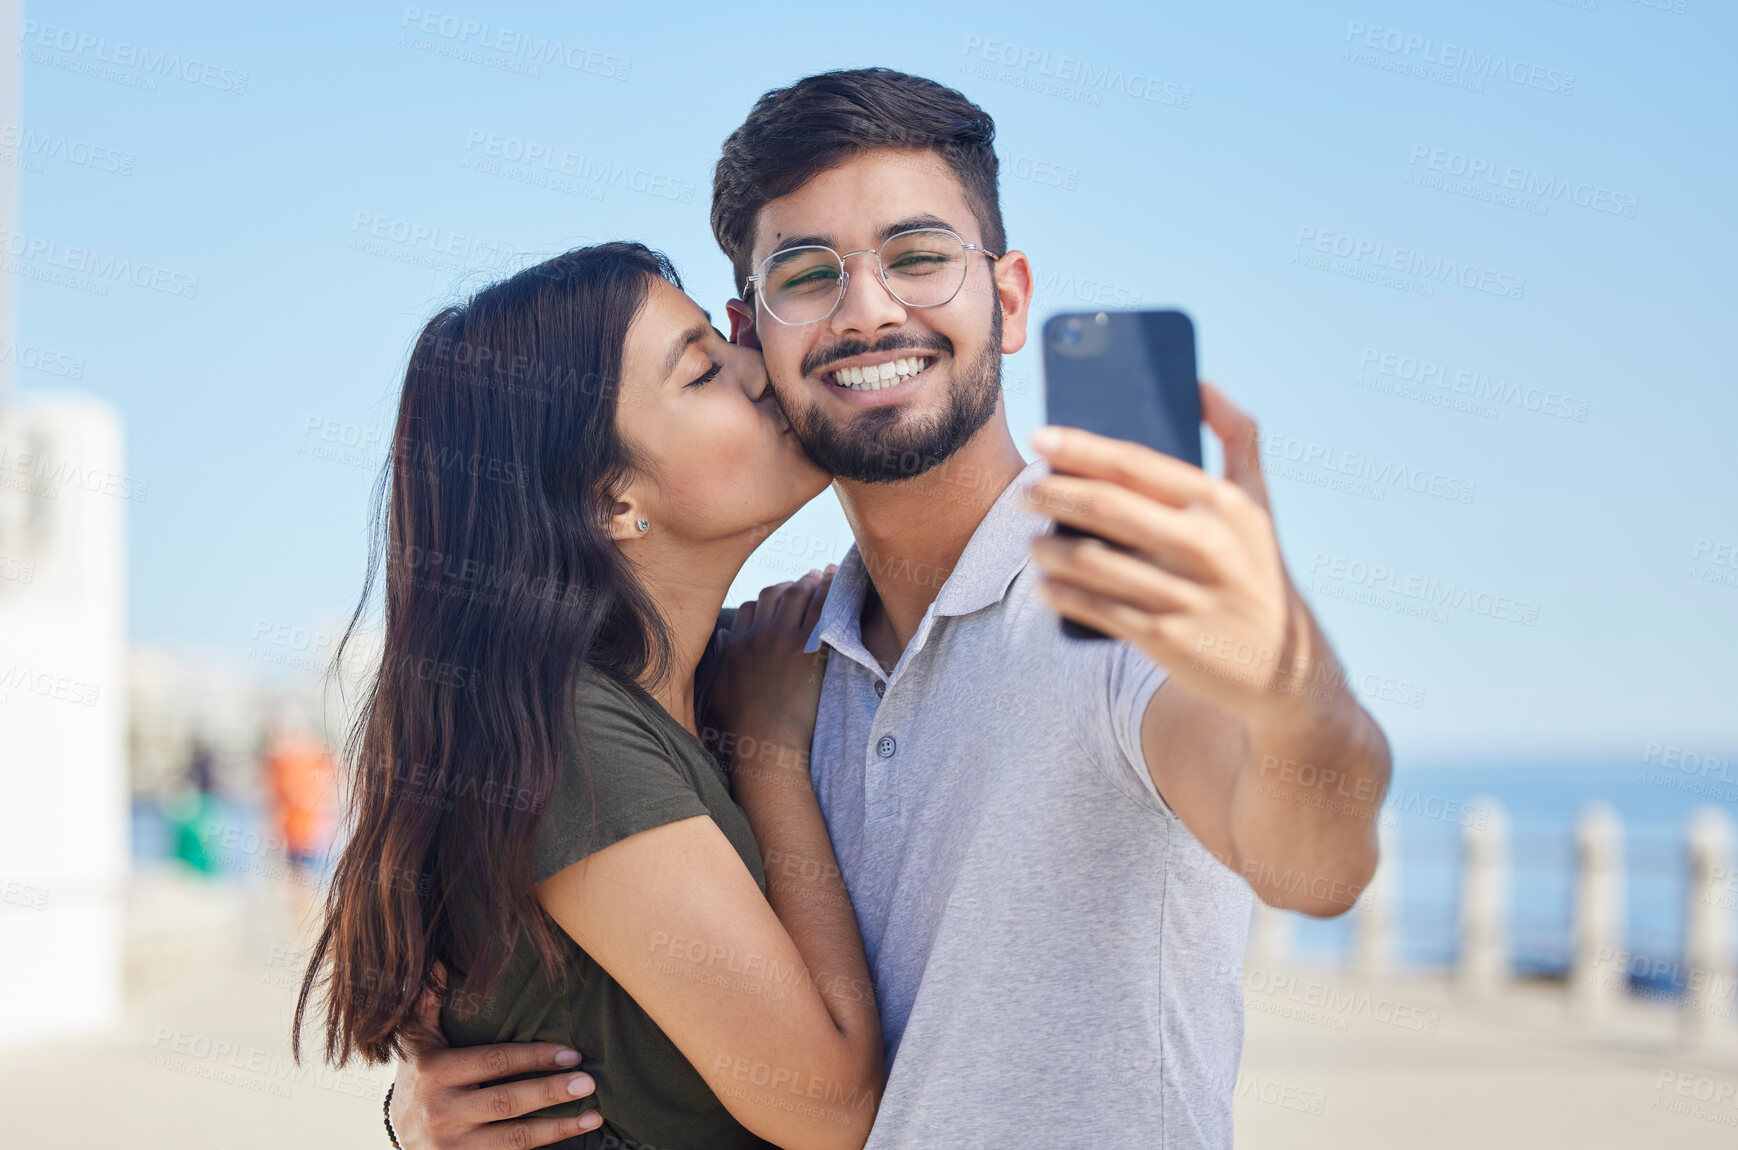 Buy stock photo Phone, kiss or couple love taking a selfie on a romantic honeymoon, beach holiday or vacation in a summer romance. Smile, profile pictures or happy man enjoys quality bonding time with Indian partner